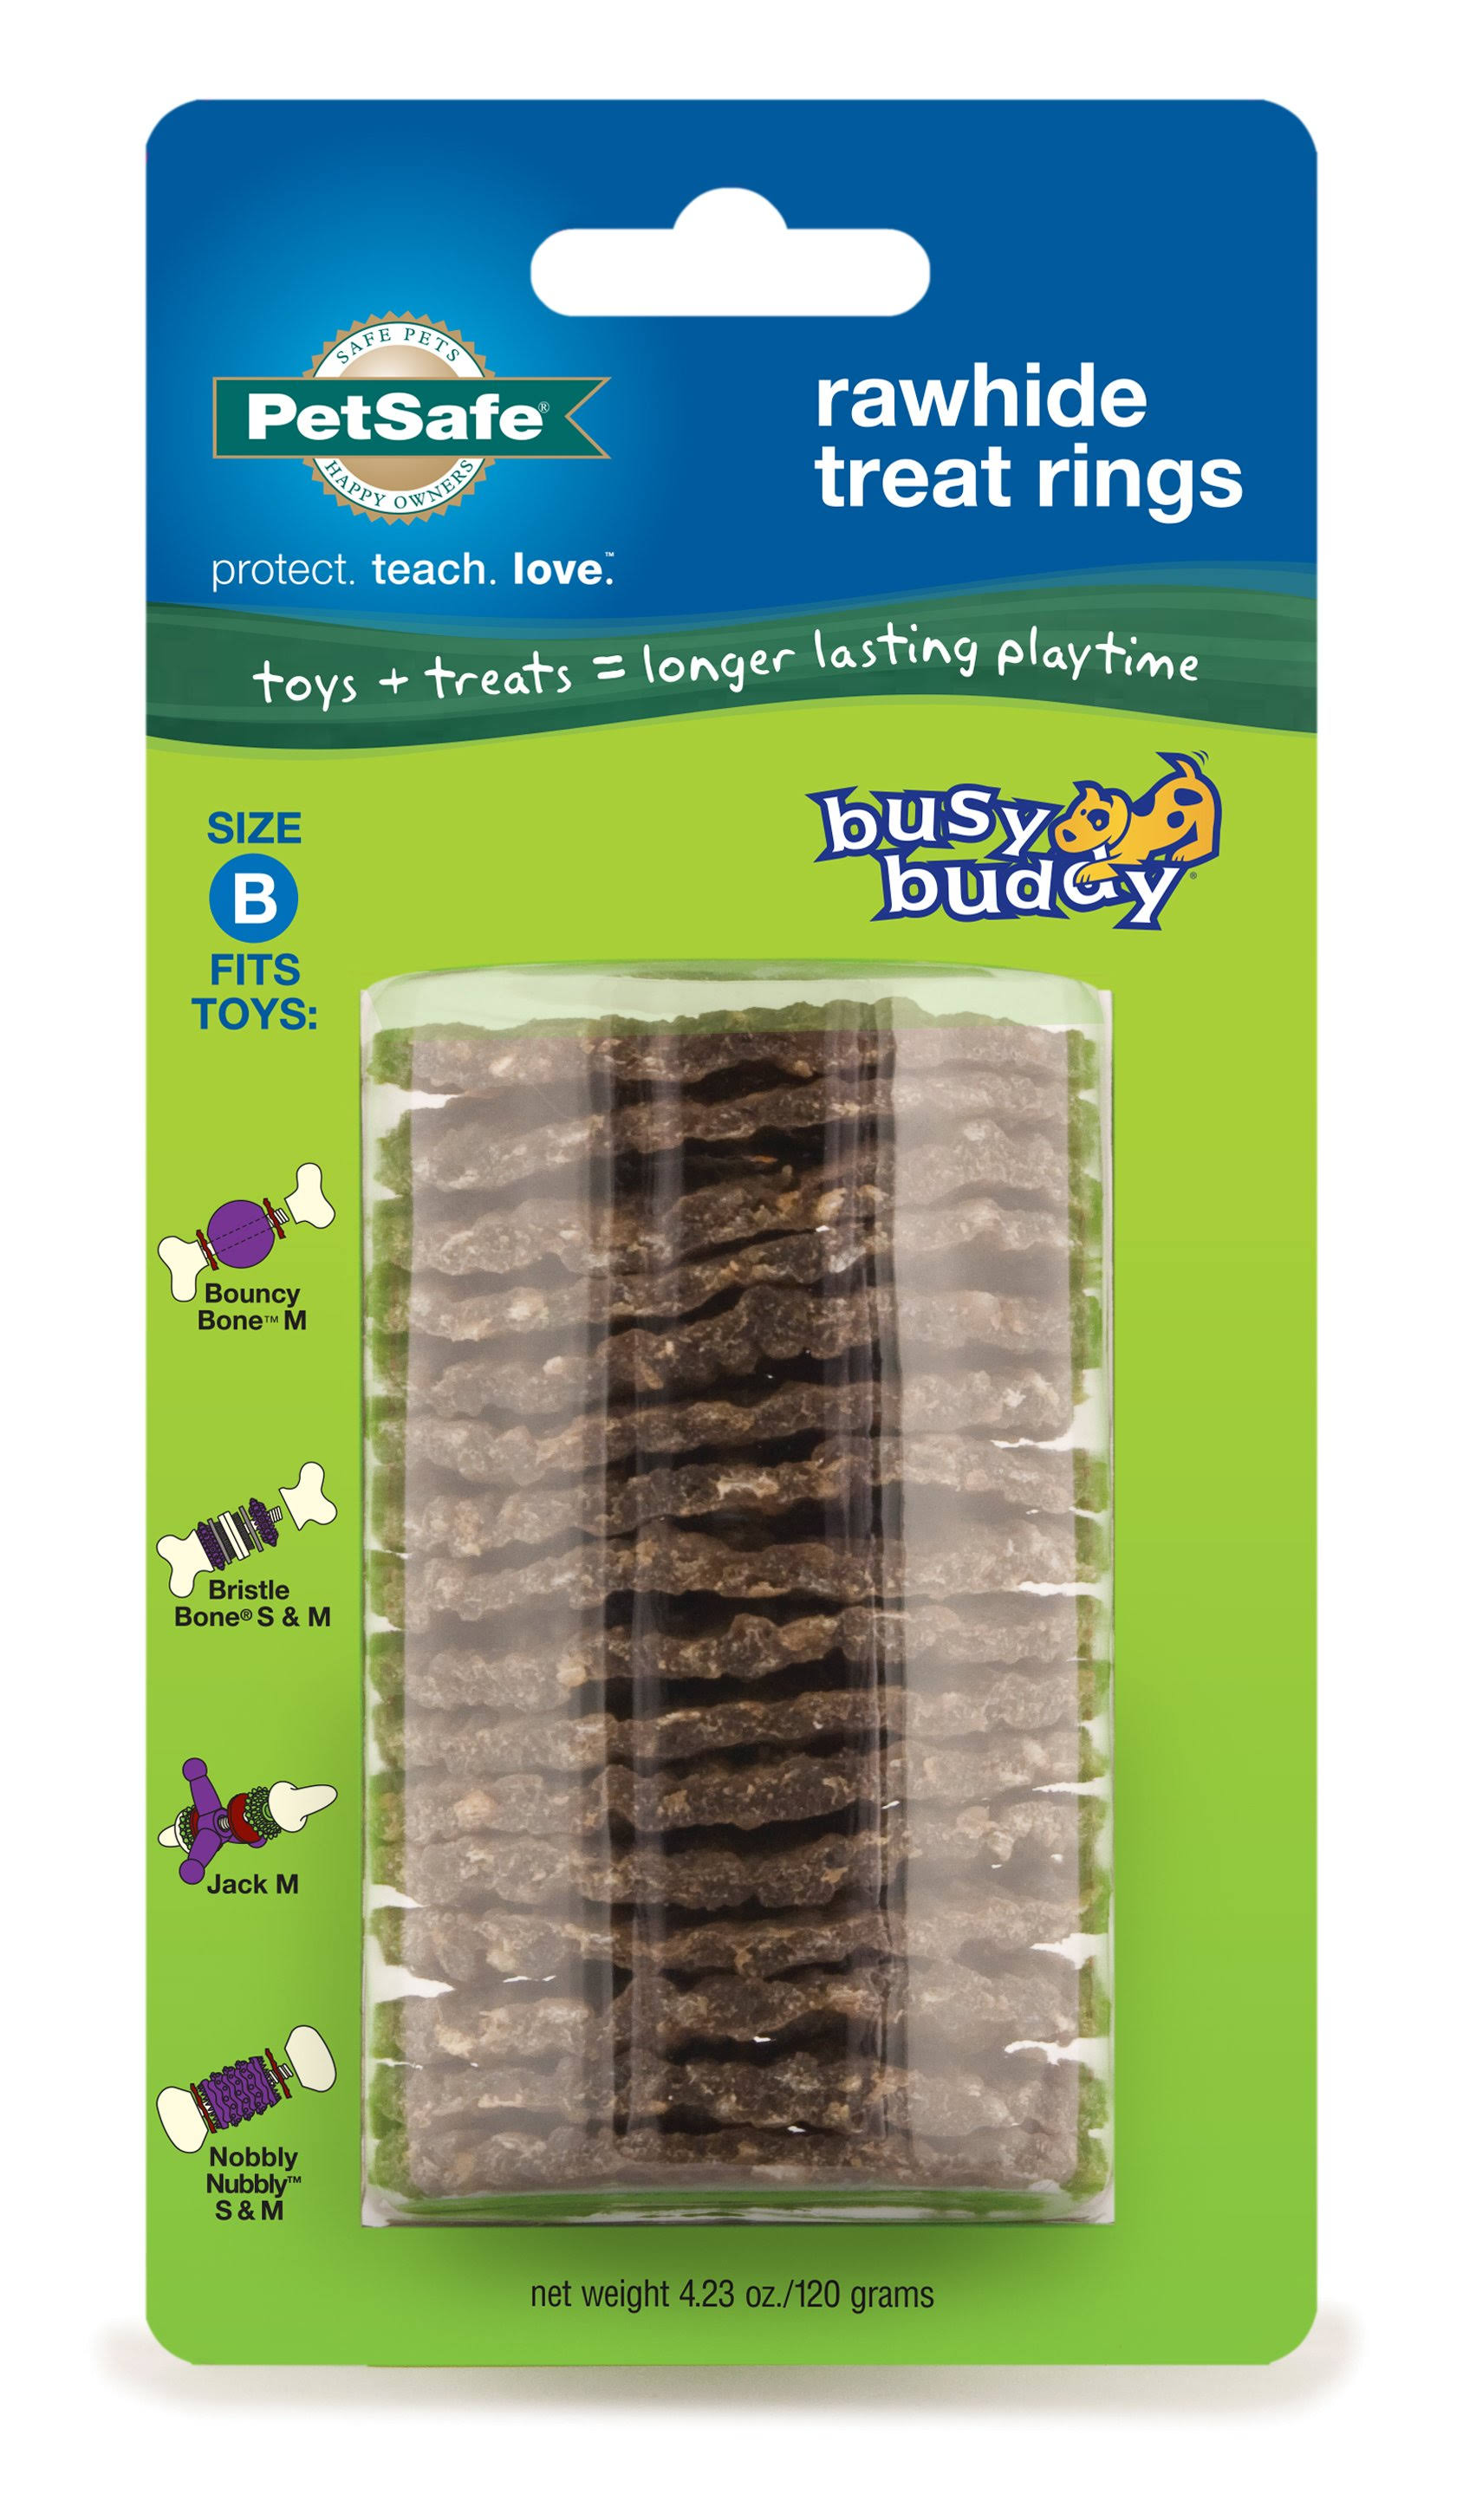 Petsafe Premier Busy Buddy Gnawhide Refill Ring Dog Treats - for Bristle or Bouncy Bones, Rawhide